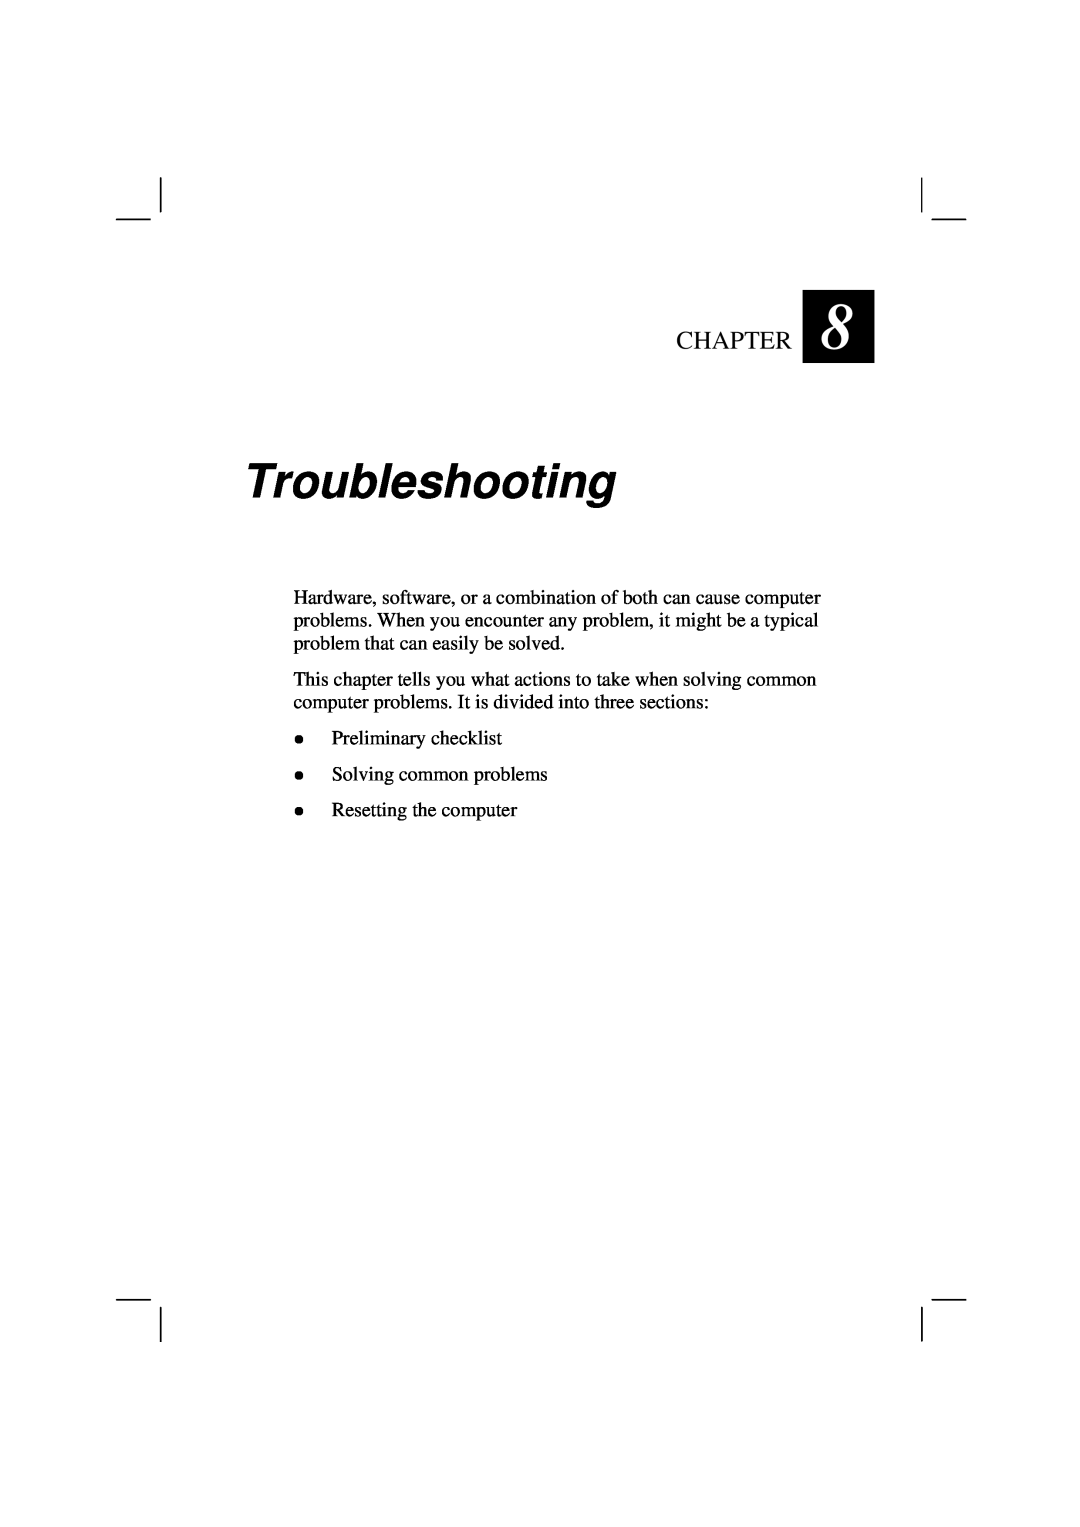 Casio HK1223 owner manual Troubleshooting, Chapter 